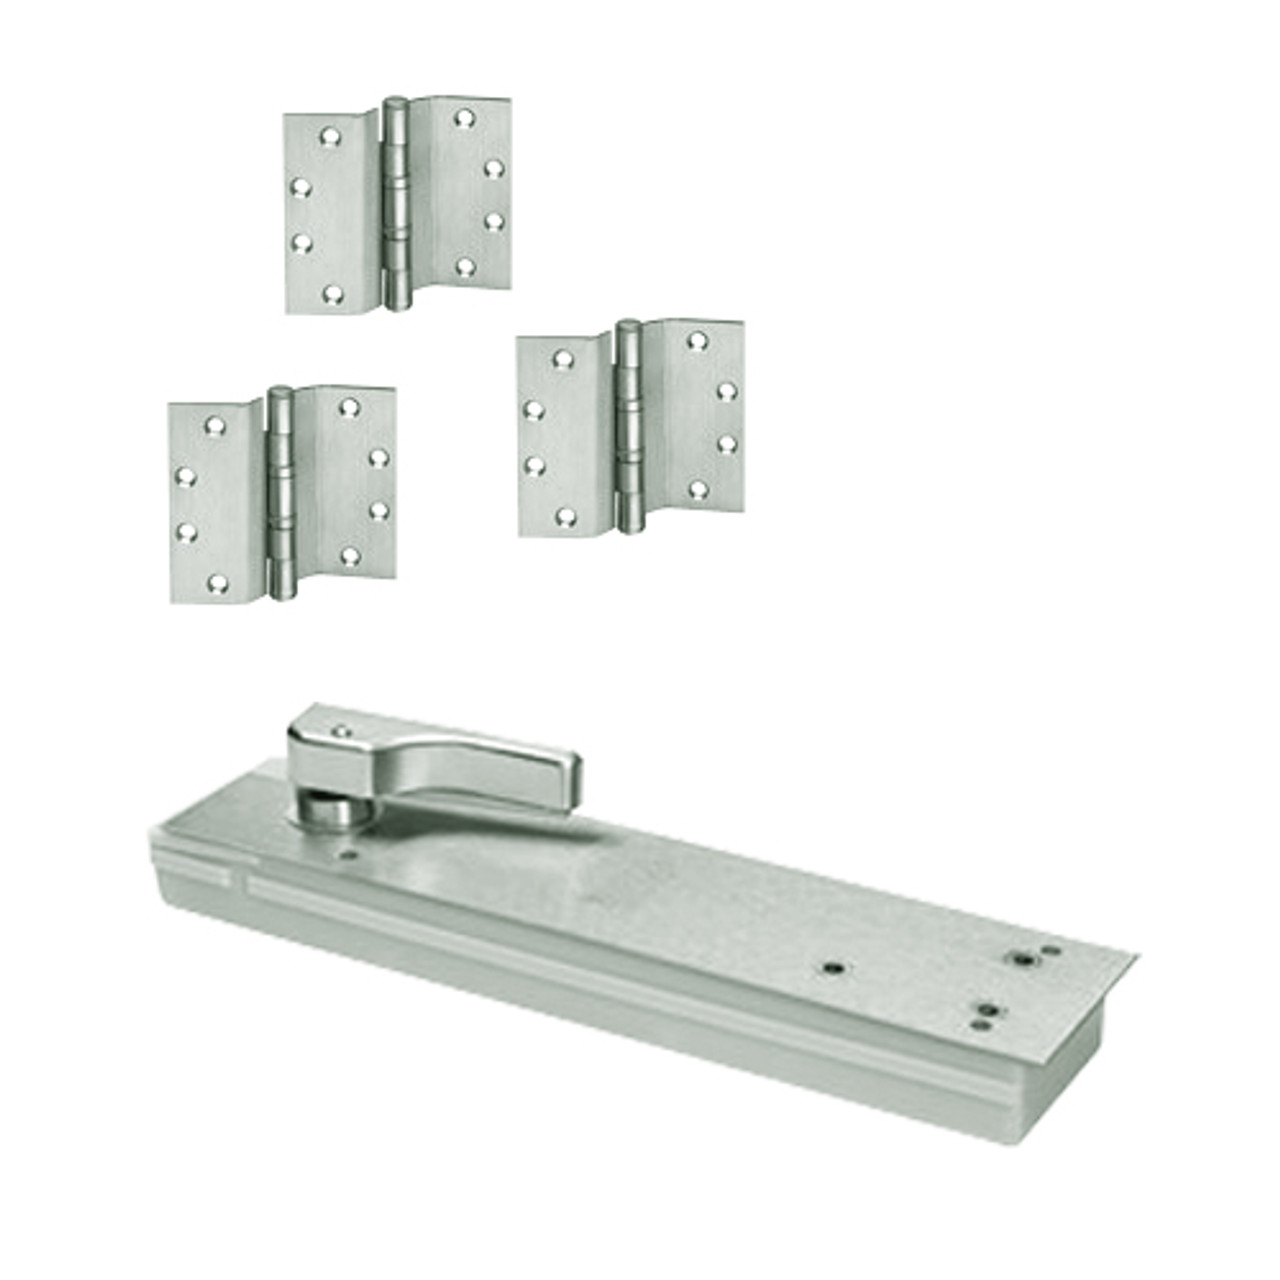 HM5105ABC90-LH-618 Rixson HM51 Series 3/4" Offset Hung Shallow Depth Floor Closers in Bright Nickel Finish